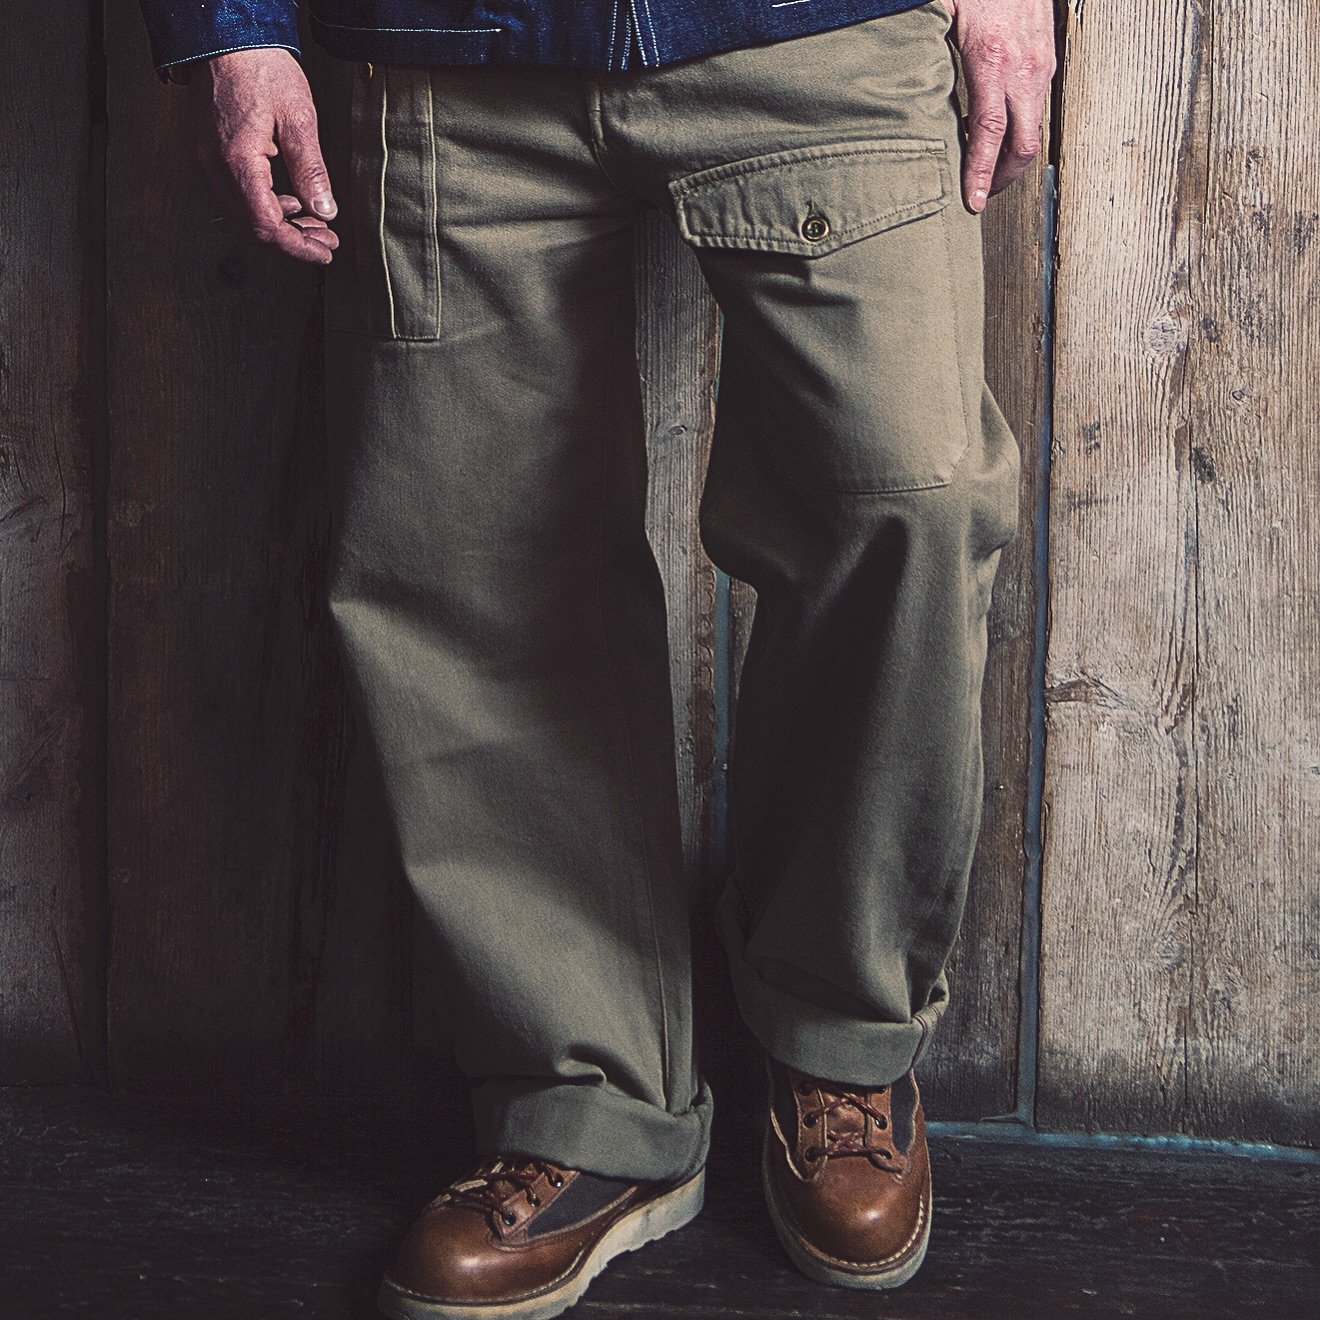 Sometimes it&rsquo;s just pants.
Our Battle Dress Fatigue Pants - 5 Colours - Sizes 30-42 - 13.5 oz Organic Cotton Selvedge Denim from Candiani Mill in Milan.
These pants are&nbsp;our homage to the&nbsp;trousers of the British Army Battle Dress unifo